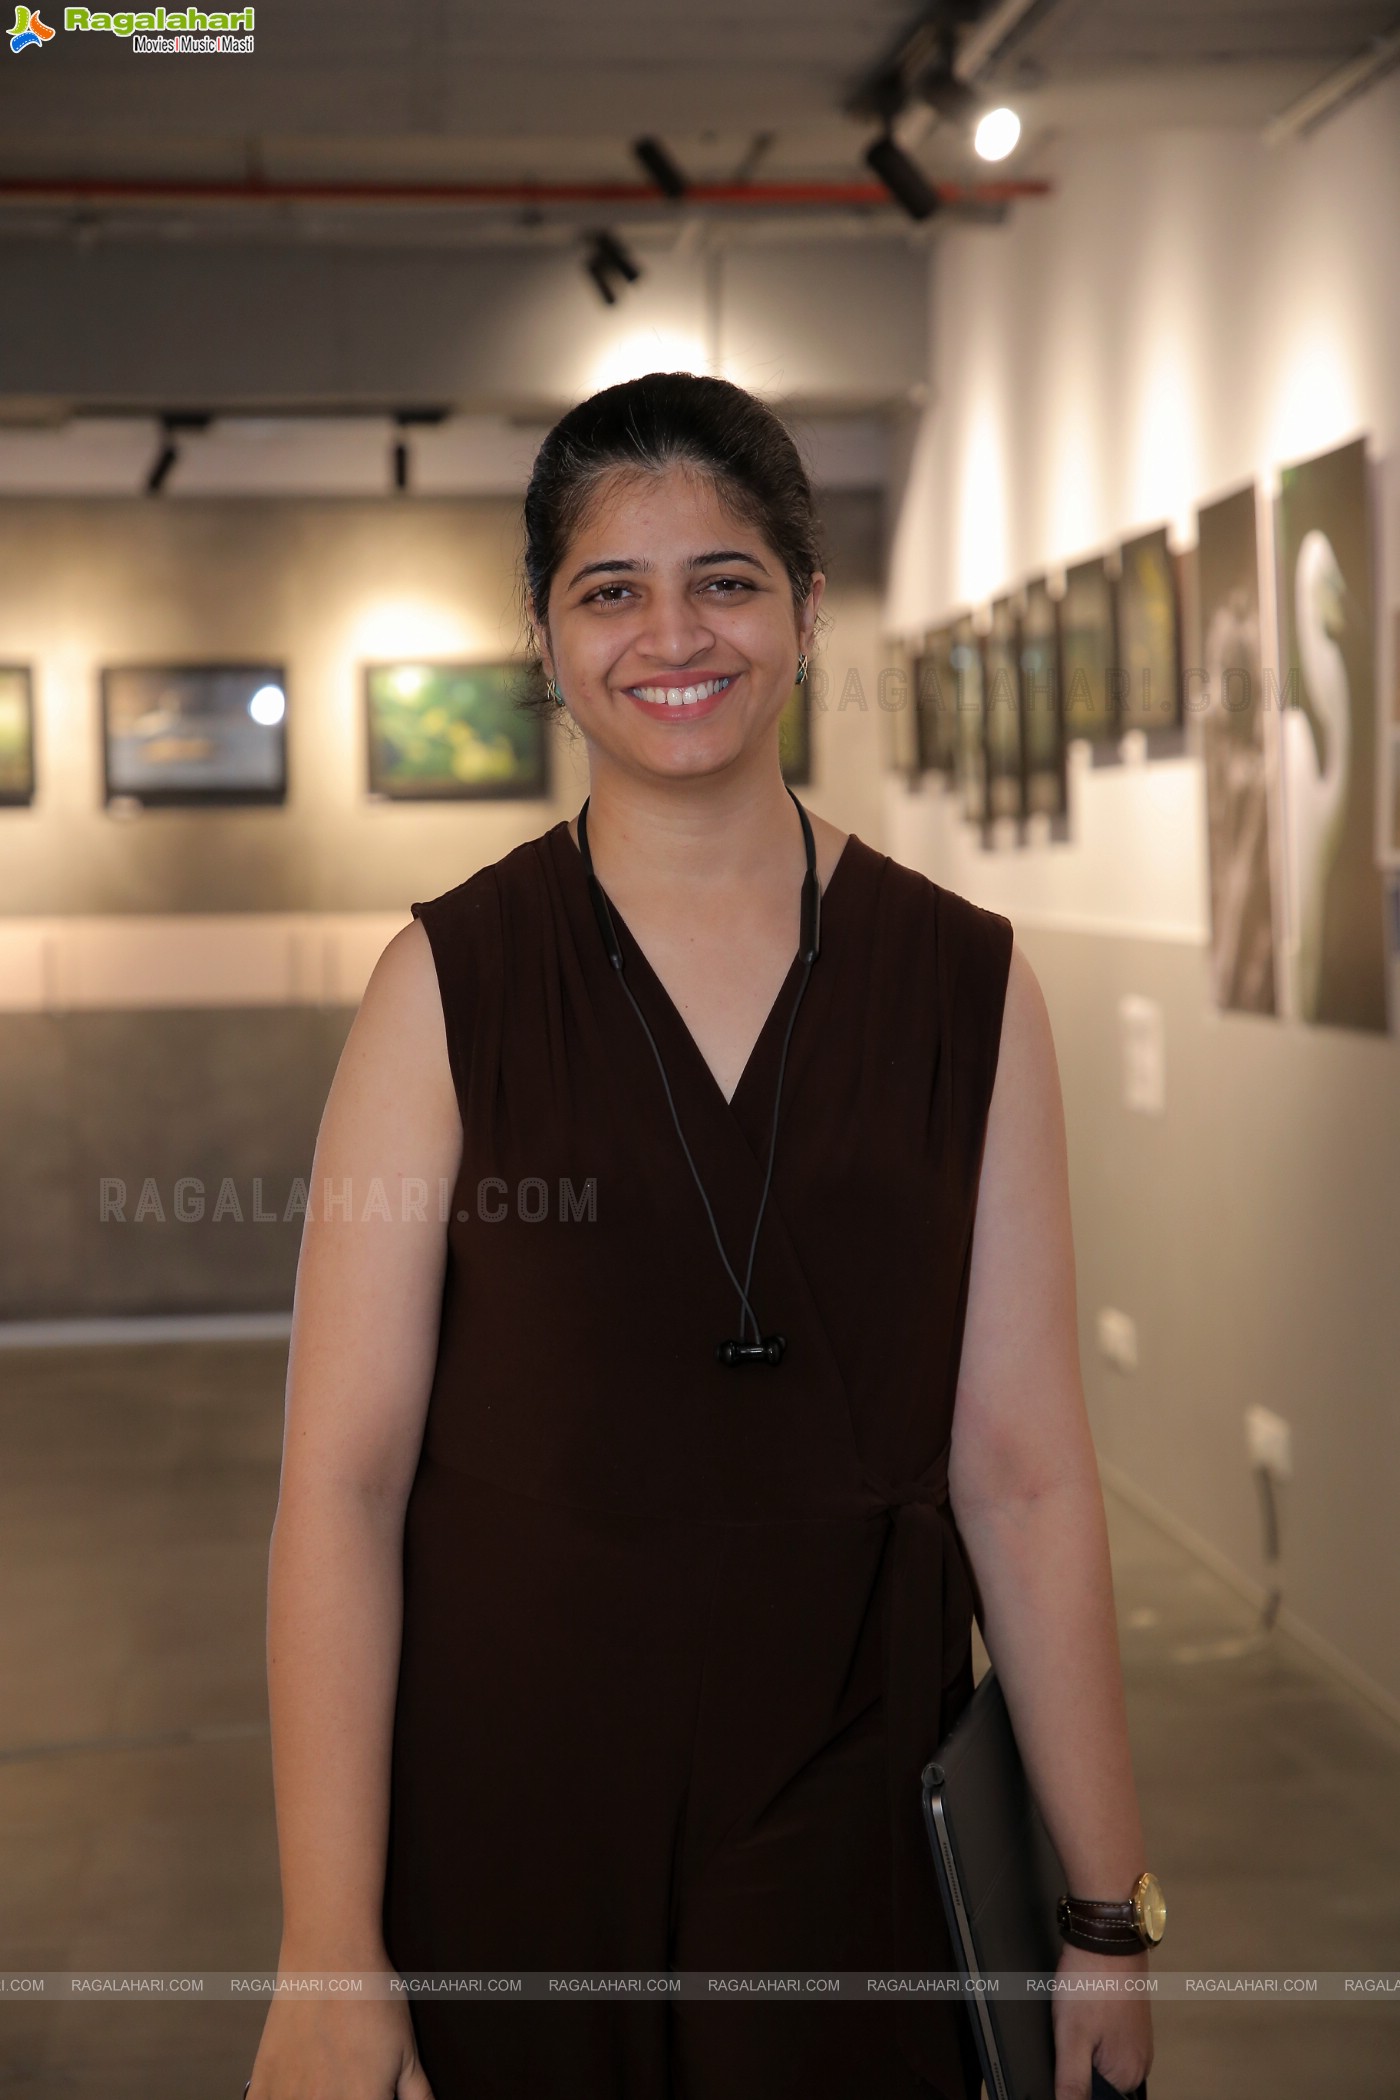 Hamstech's PIXEL Perfect 2022 Annual Photo Exhibition at Nagarjuna Hills Campus